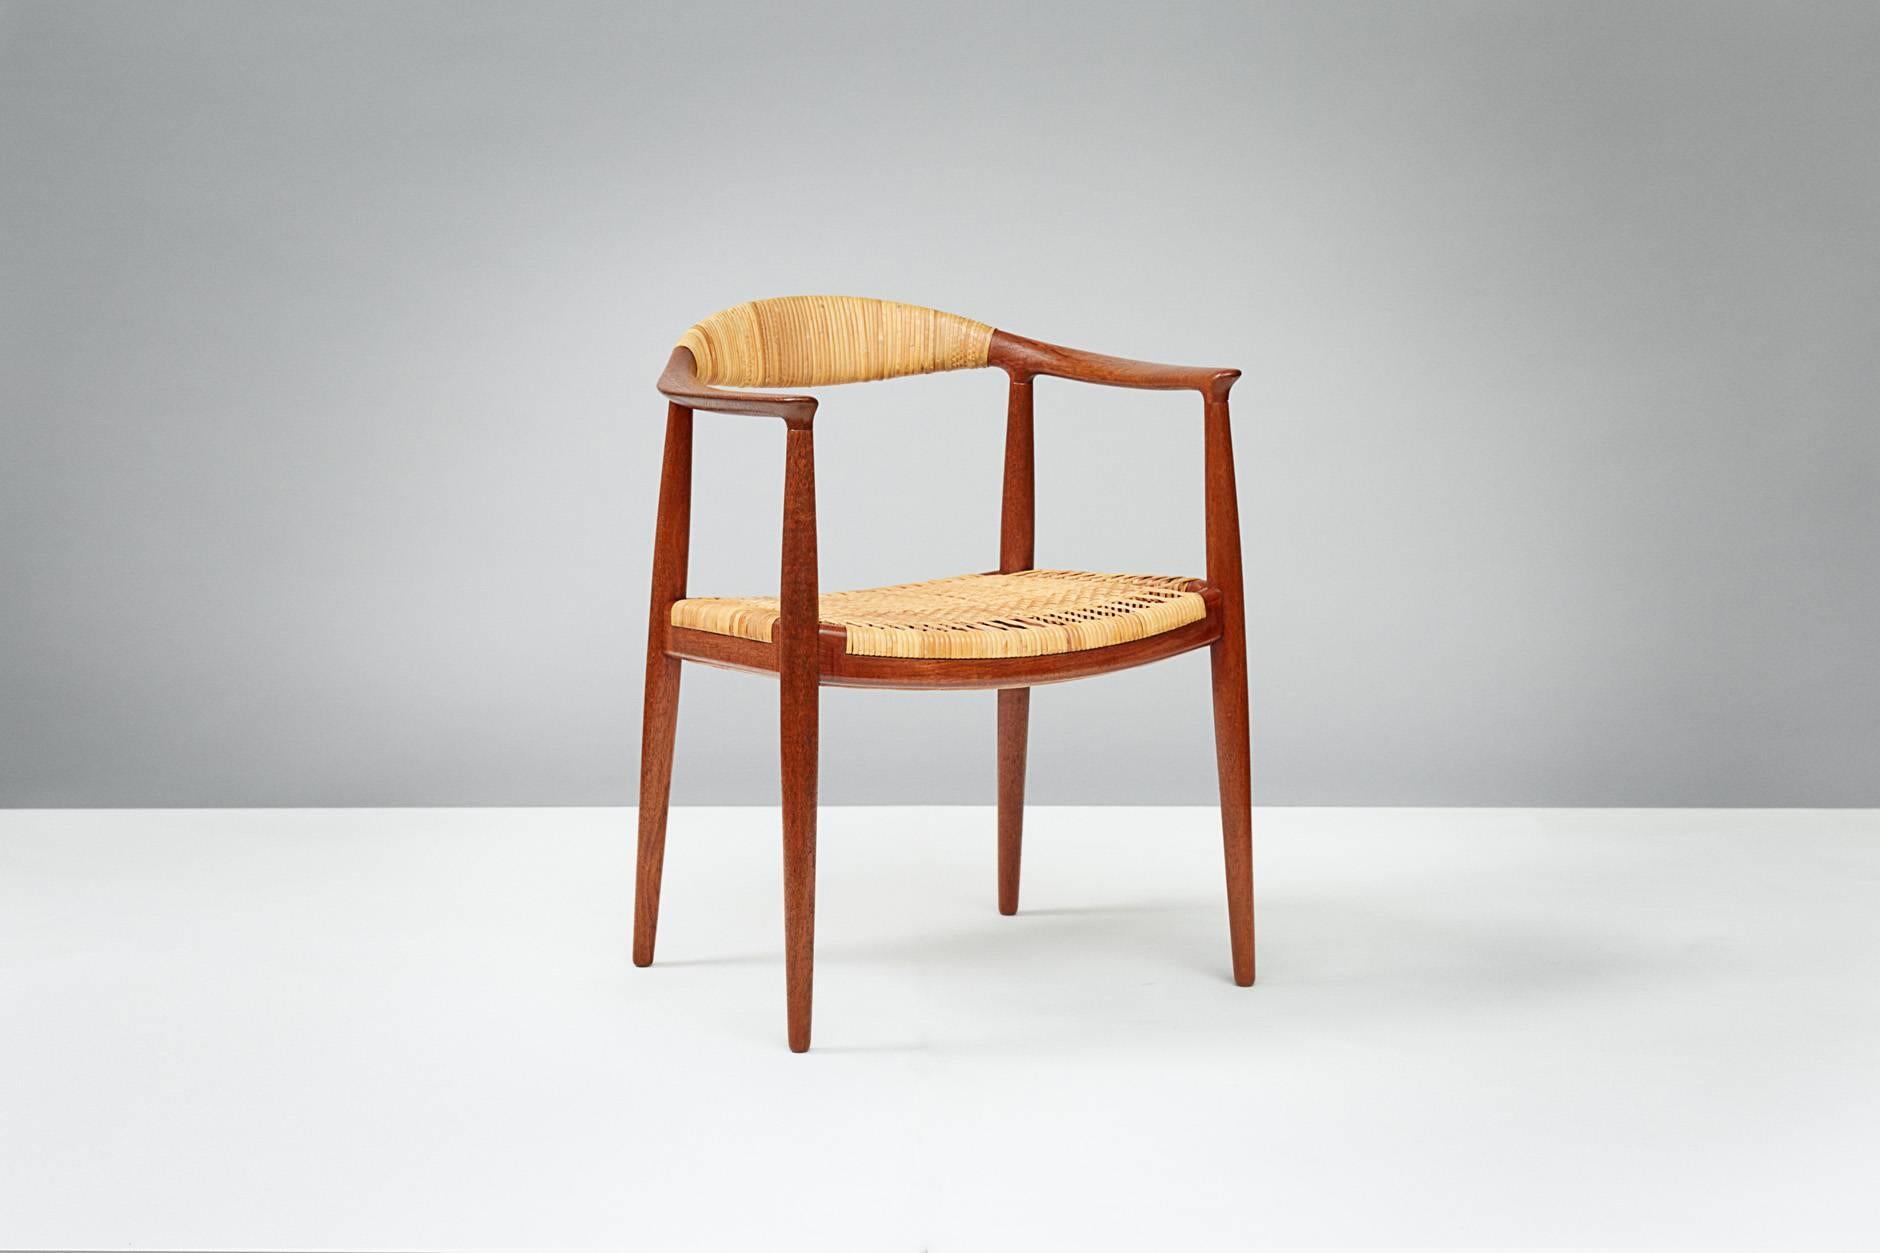 Hans Wegner

JH-501 'The Chair', 1949

Wegner's most iconic design, variously referred to as the 'Round Chair' or simply 'The Chair'. This first iteration of his seminal design featured a woven seat and back which was discarded for later